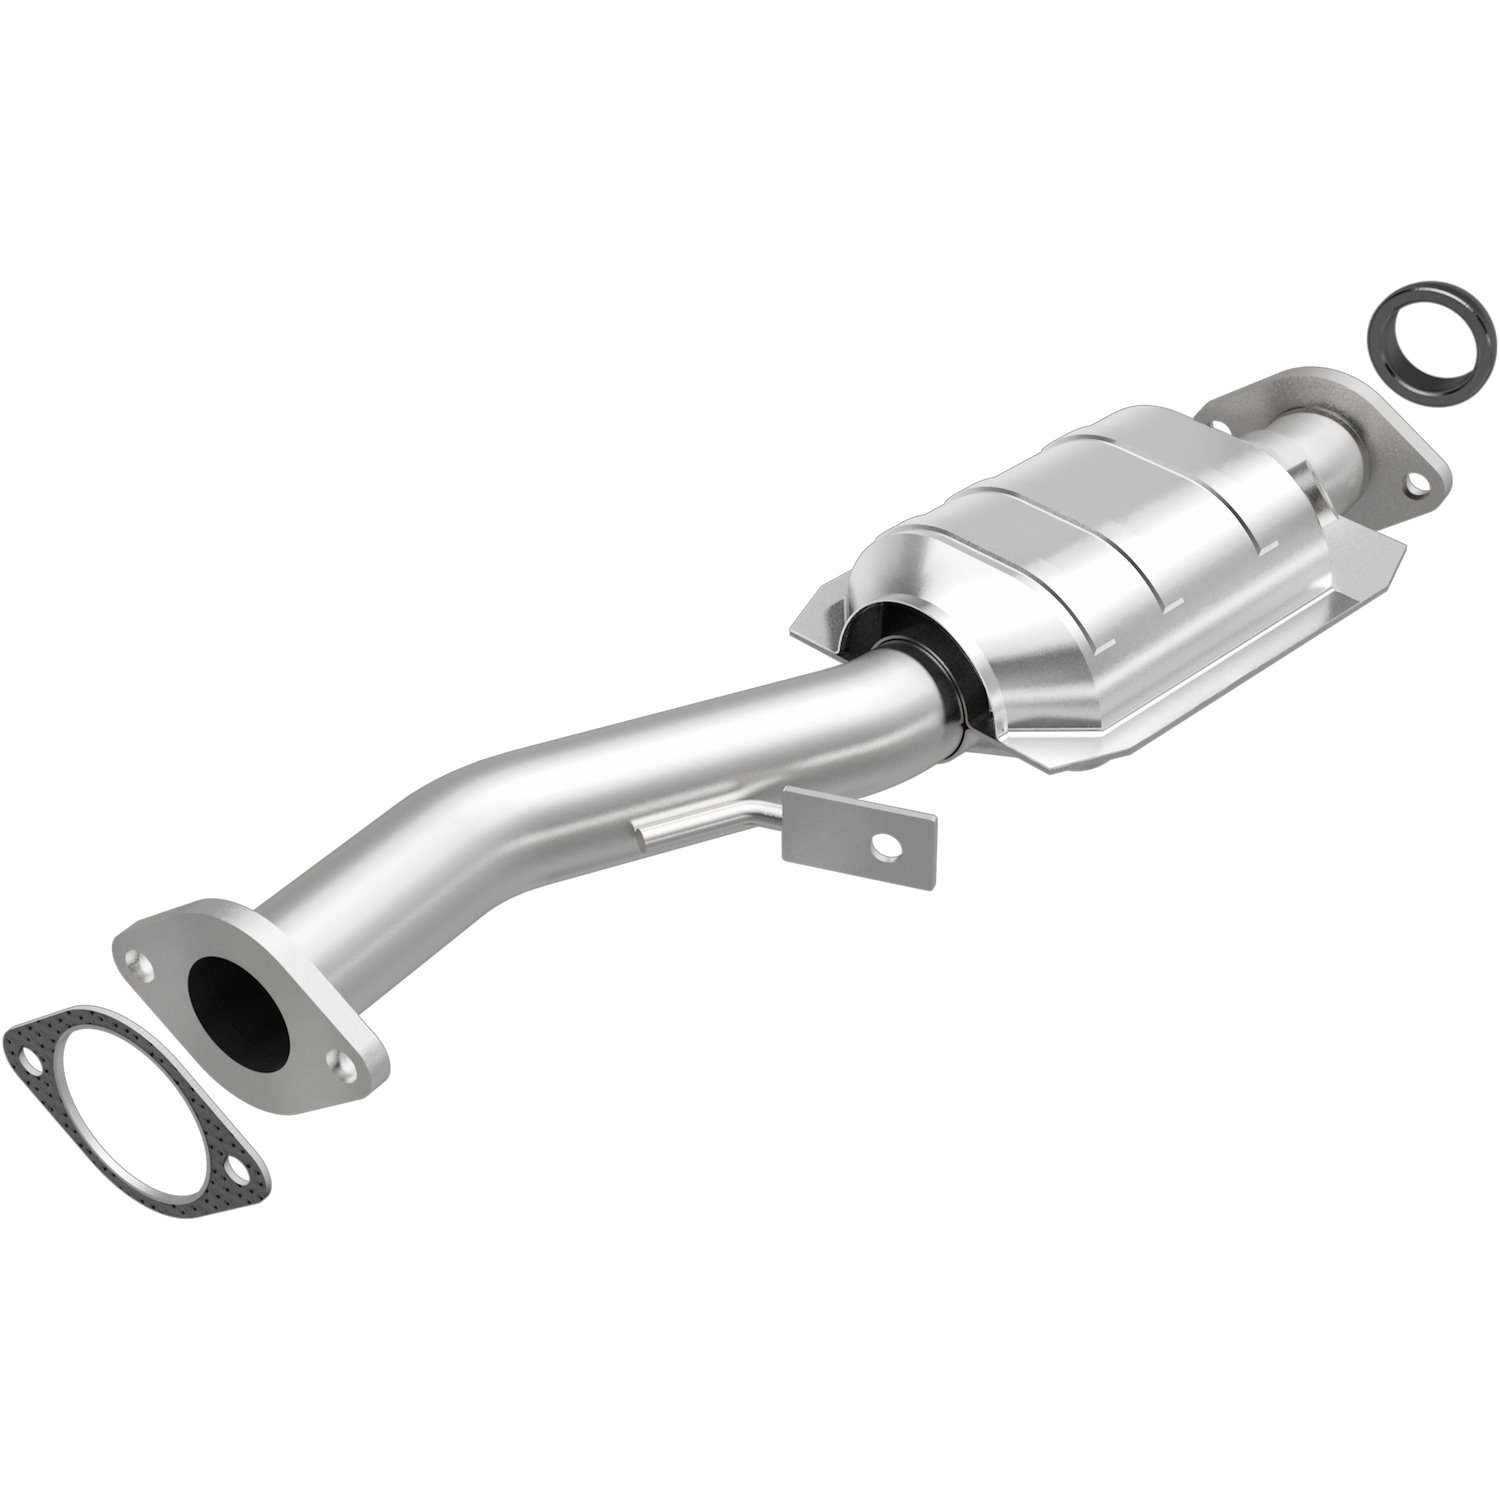 OEM Grade Federal / EPA Compliant Direct-Fit Catalytic Converter 51113